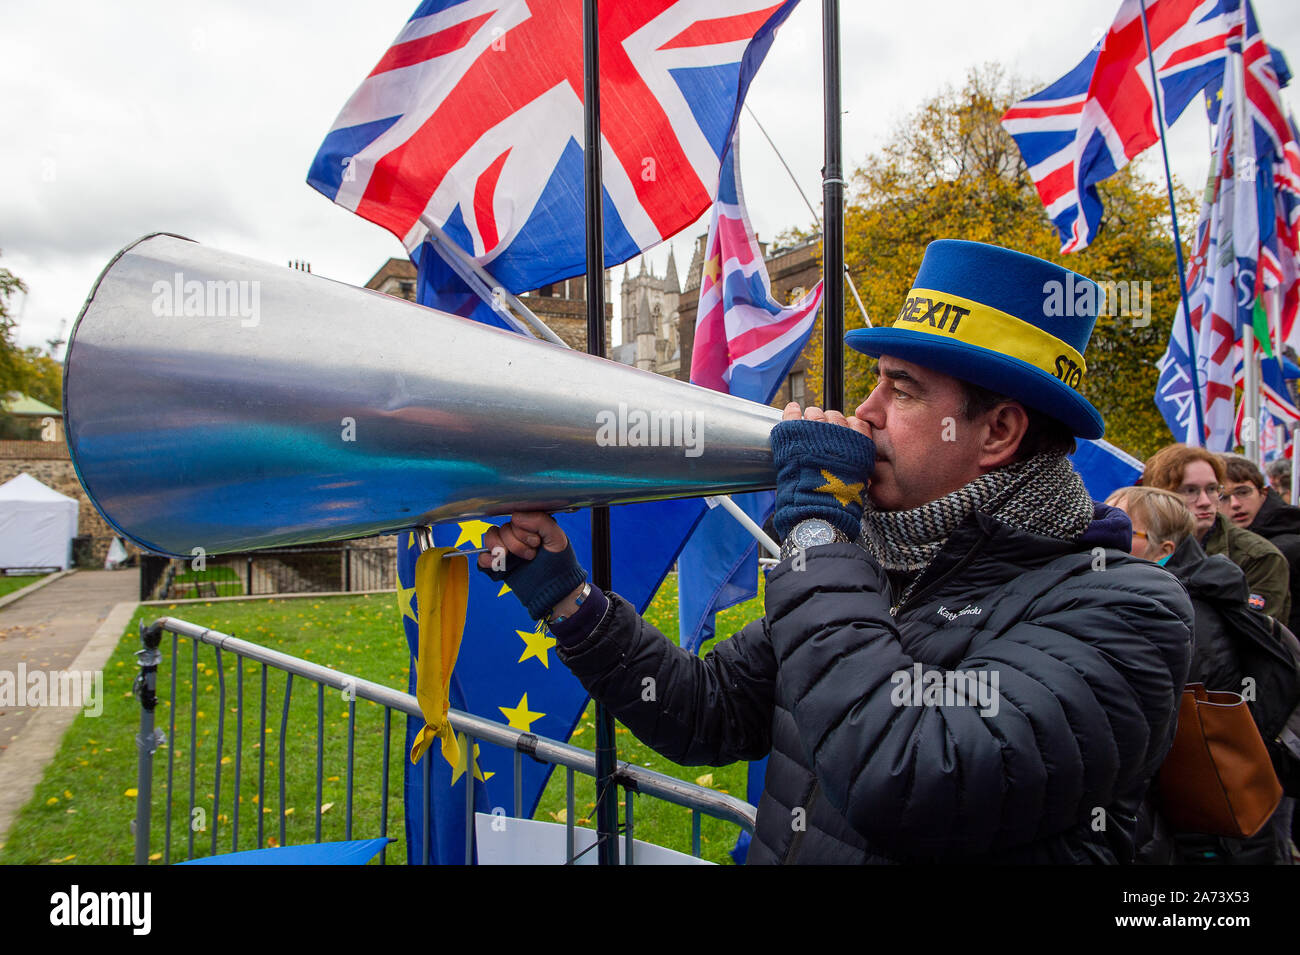 Westminster, London, UK. 29th October, 2019. SODEM Stop Brexit man Steve Bray with his loud hailer at College Green, Westminister. Credit: Maureen McLean/Alamy Stock Photo